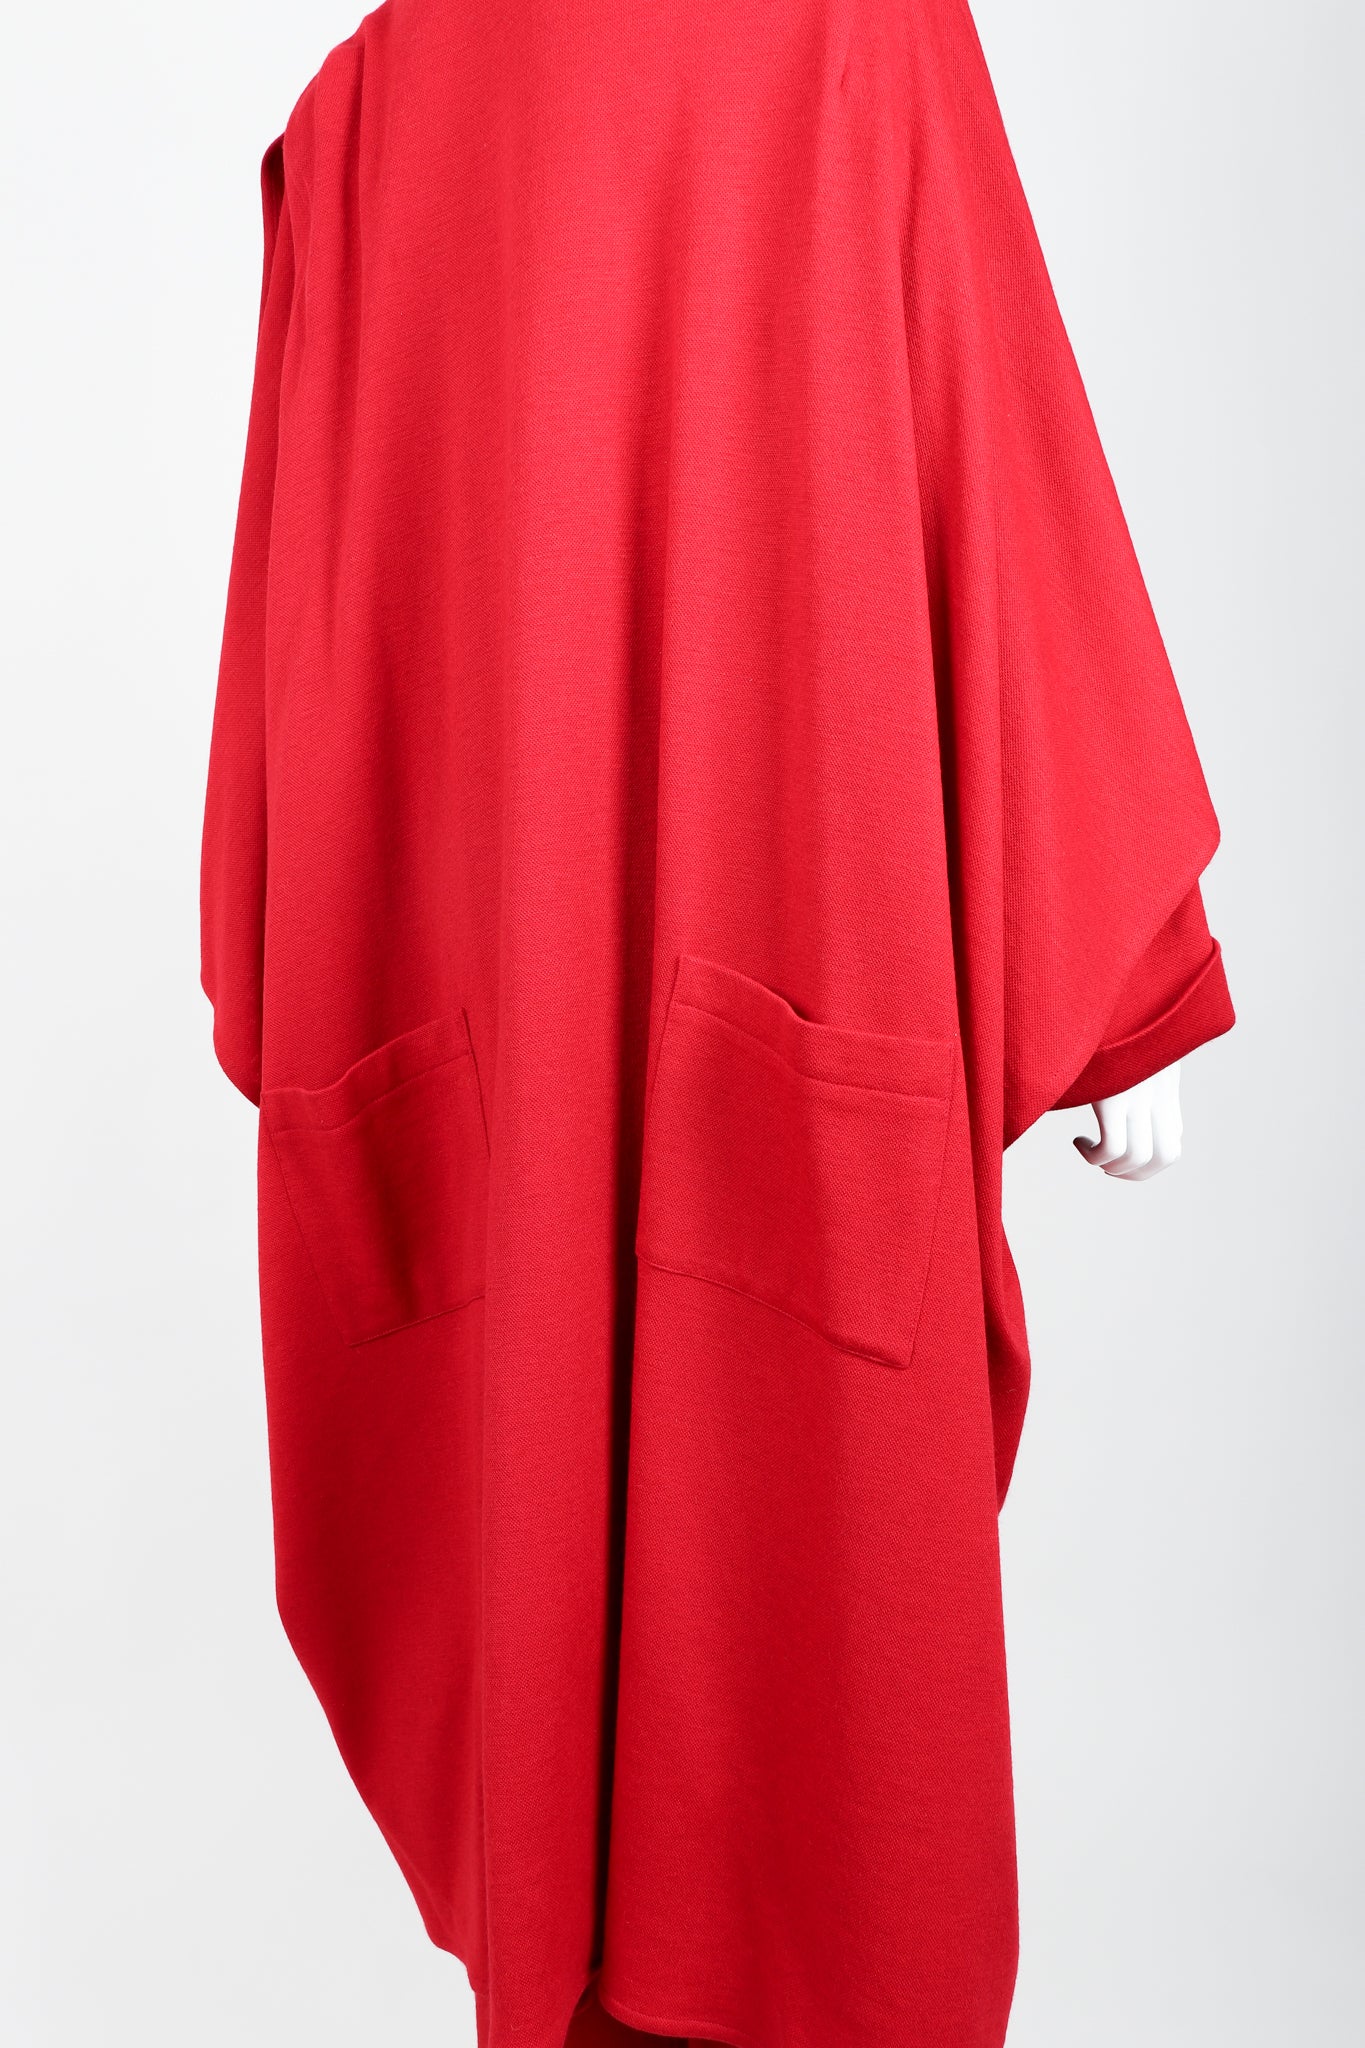 Vintage Sonia Rykiel Red Knit Cape Coat & Pant Set on mannequin back pockets at Recess